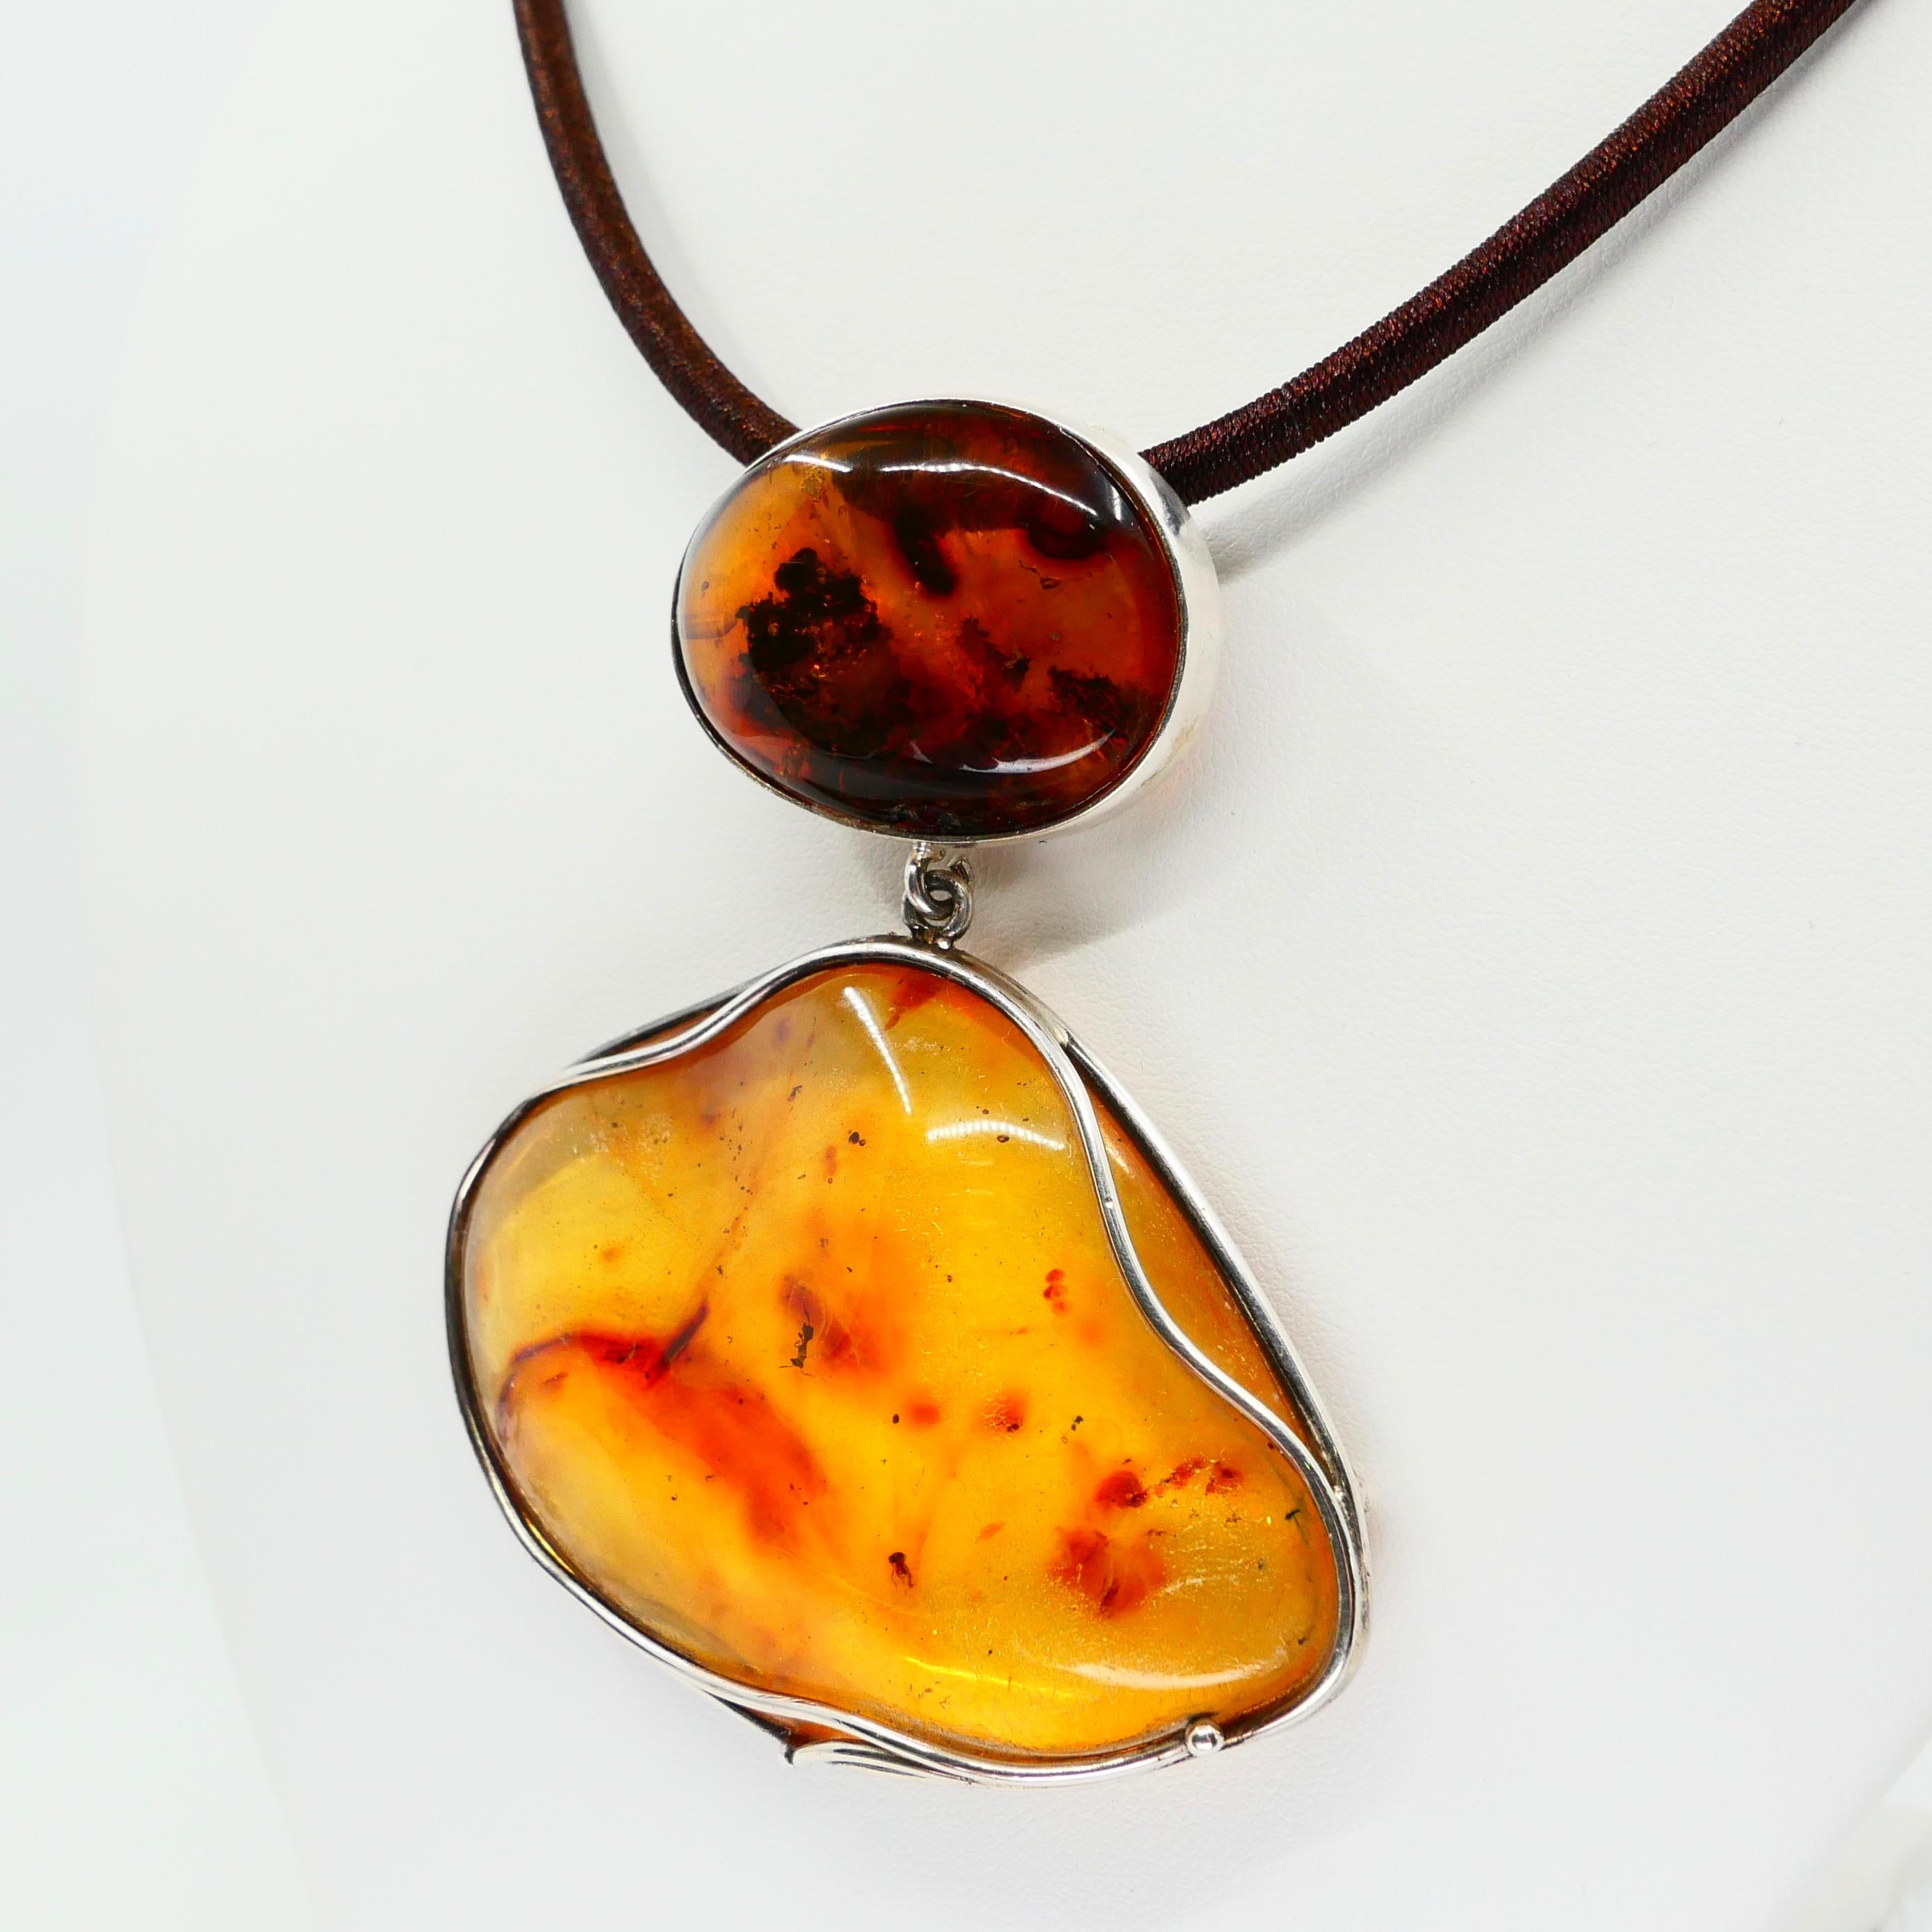 Rough Cut Certified Copal Resin Amber Pendant Necklace with Insect, Statement Jewelry For Sale